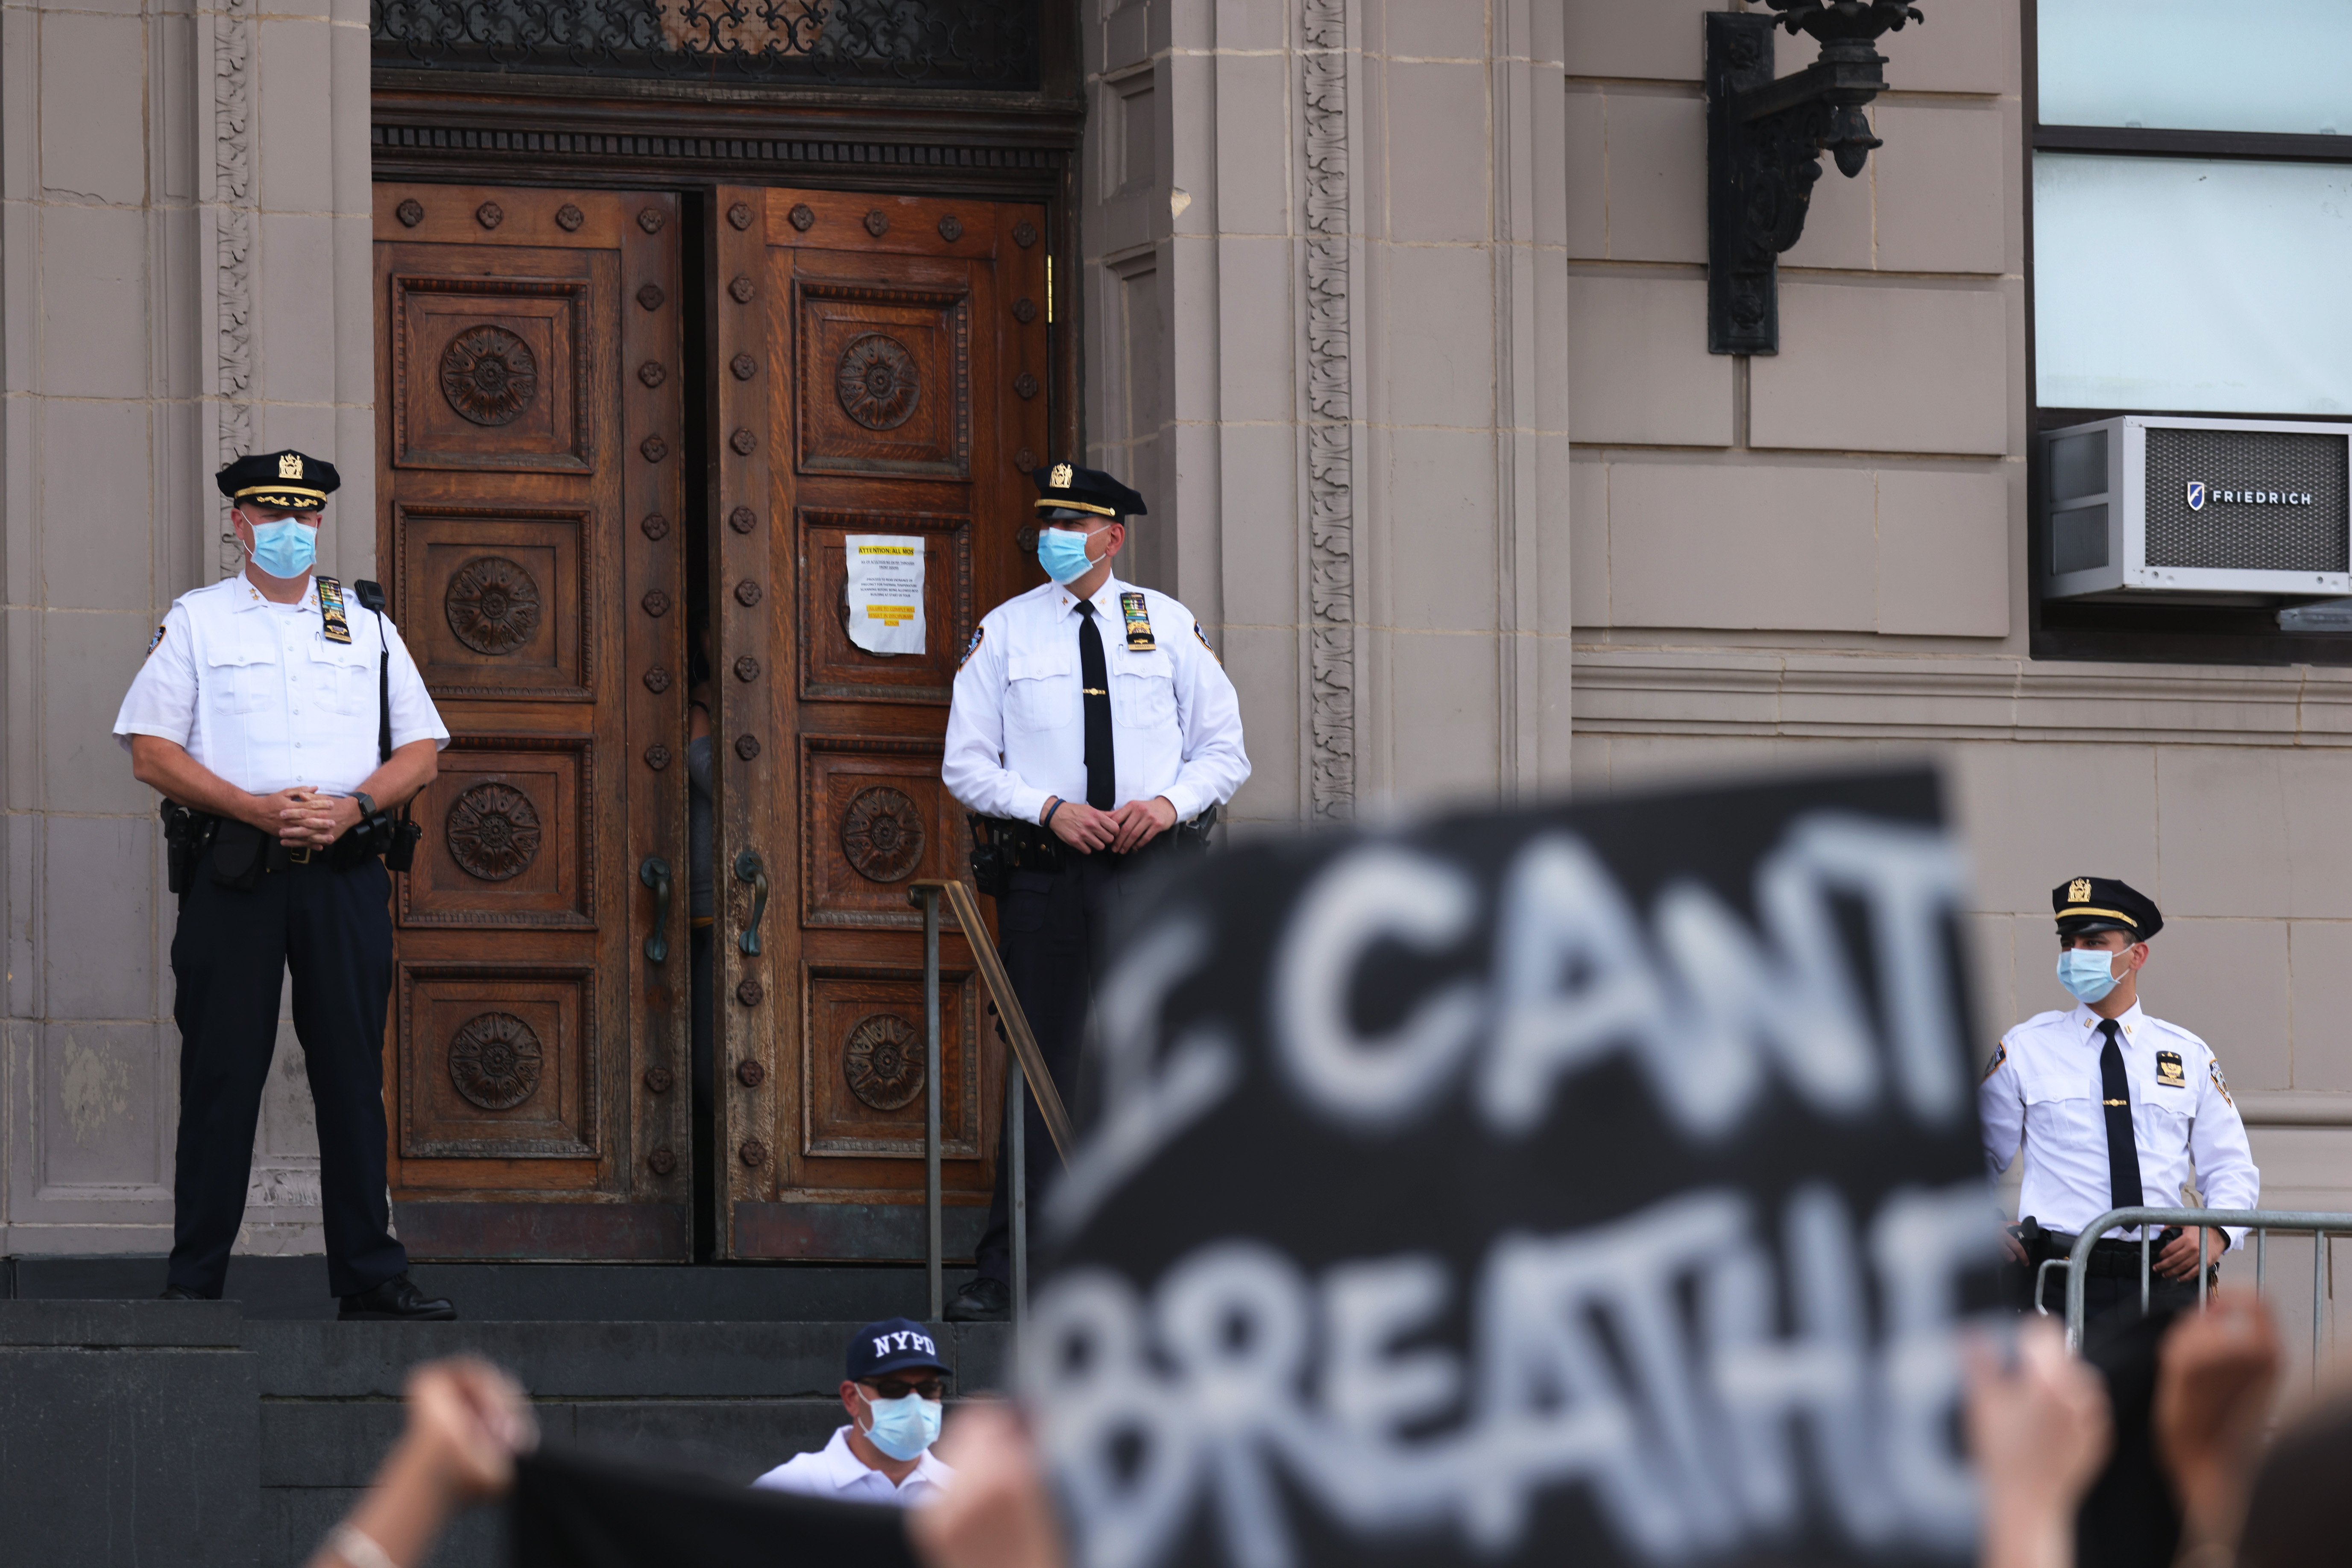 Police officers stand guard as protesters gather in front of the 120th NYPD precinct on the sixth anniversary of Eric Garner's death in Tompkinsville, Staten Island on July 17, 2020 in New York City. (Michael M. Santiago/Getty Images)